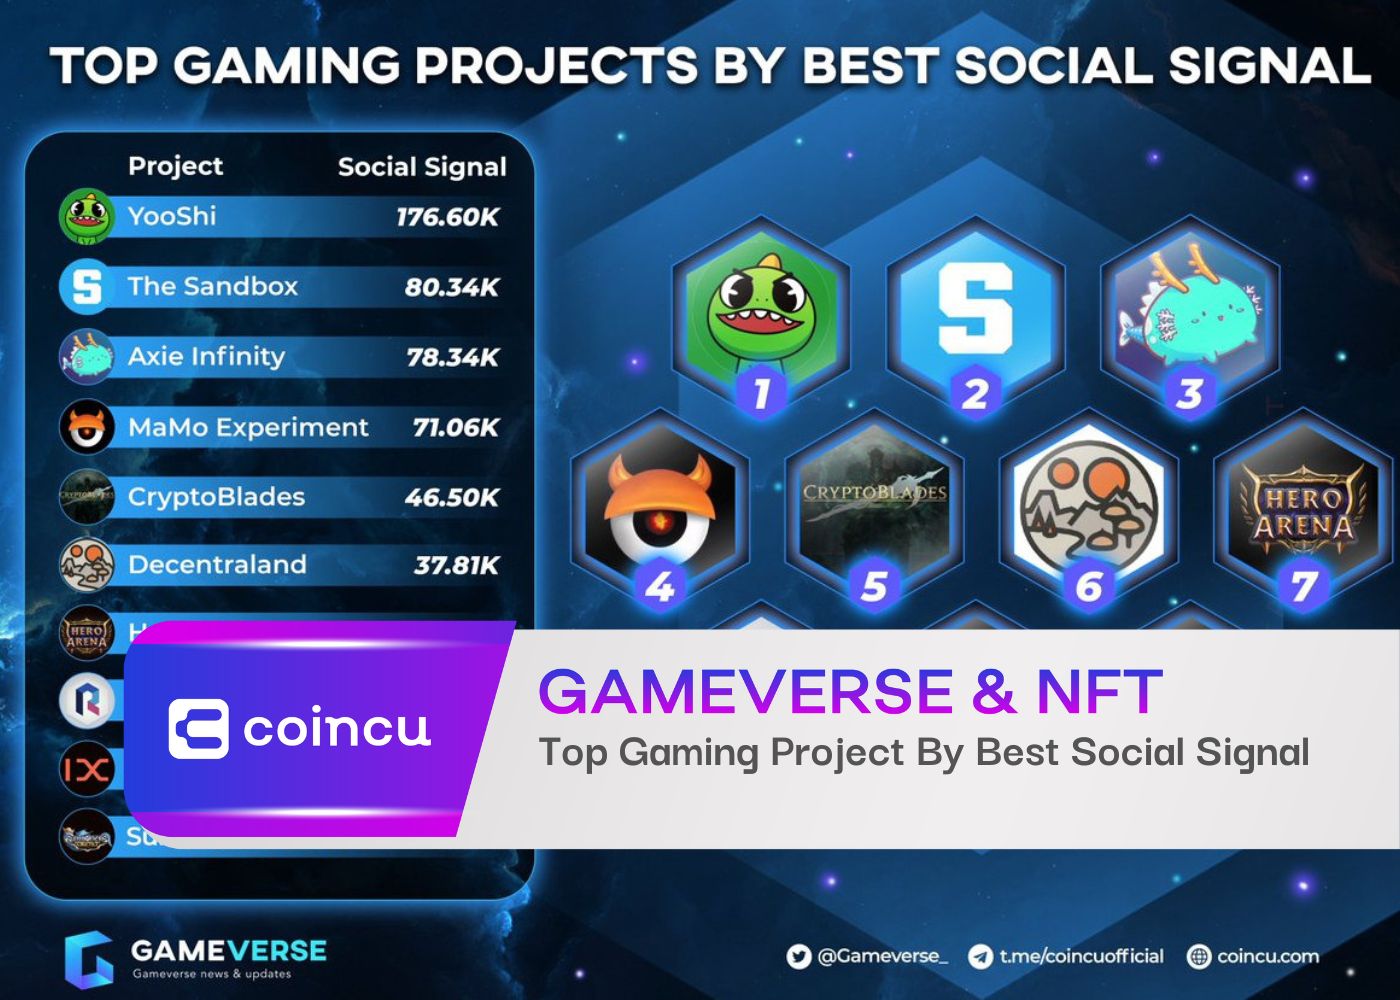 Top Gaming Project By Best Social Signal